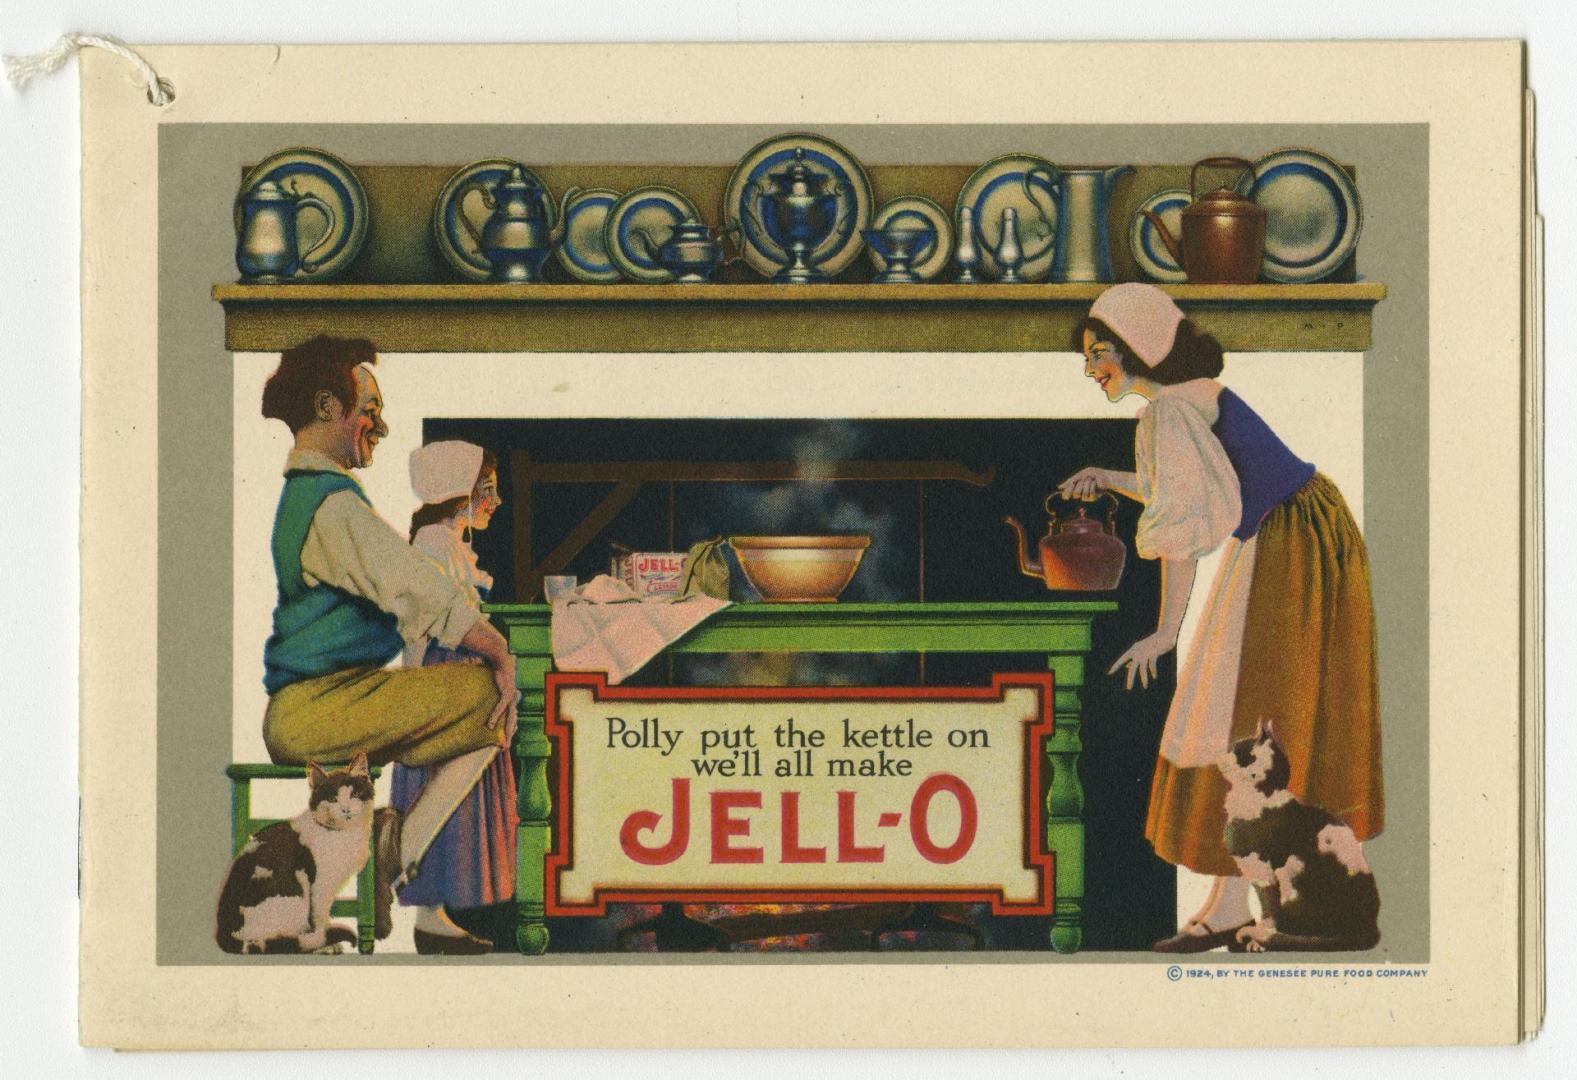 Polly put the kettle on we'll all make Jell-O